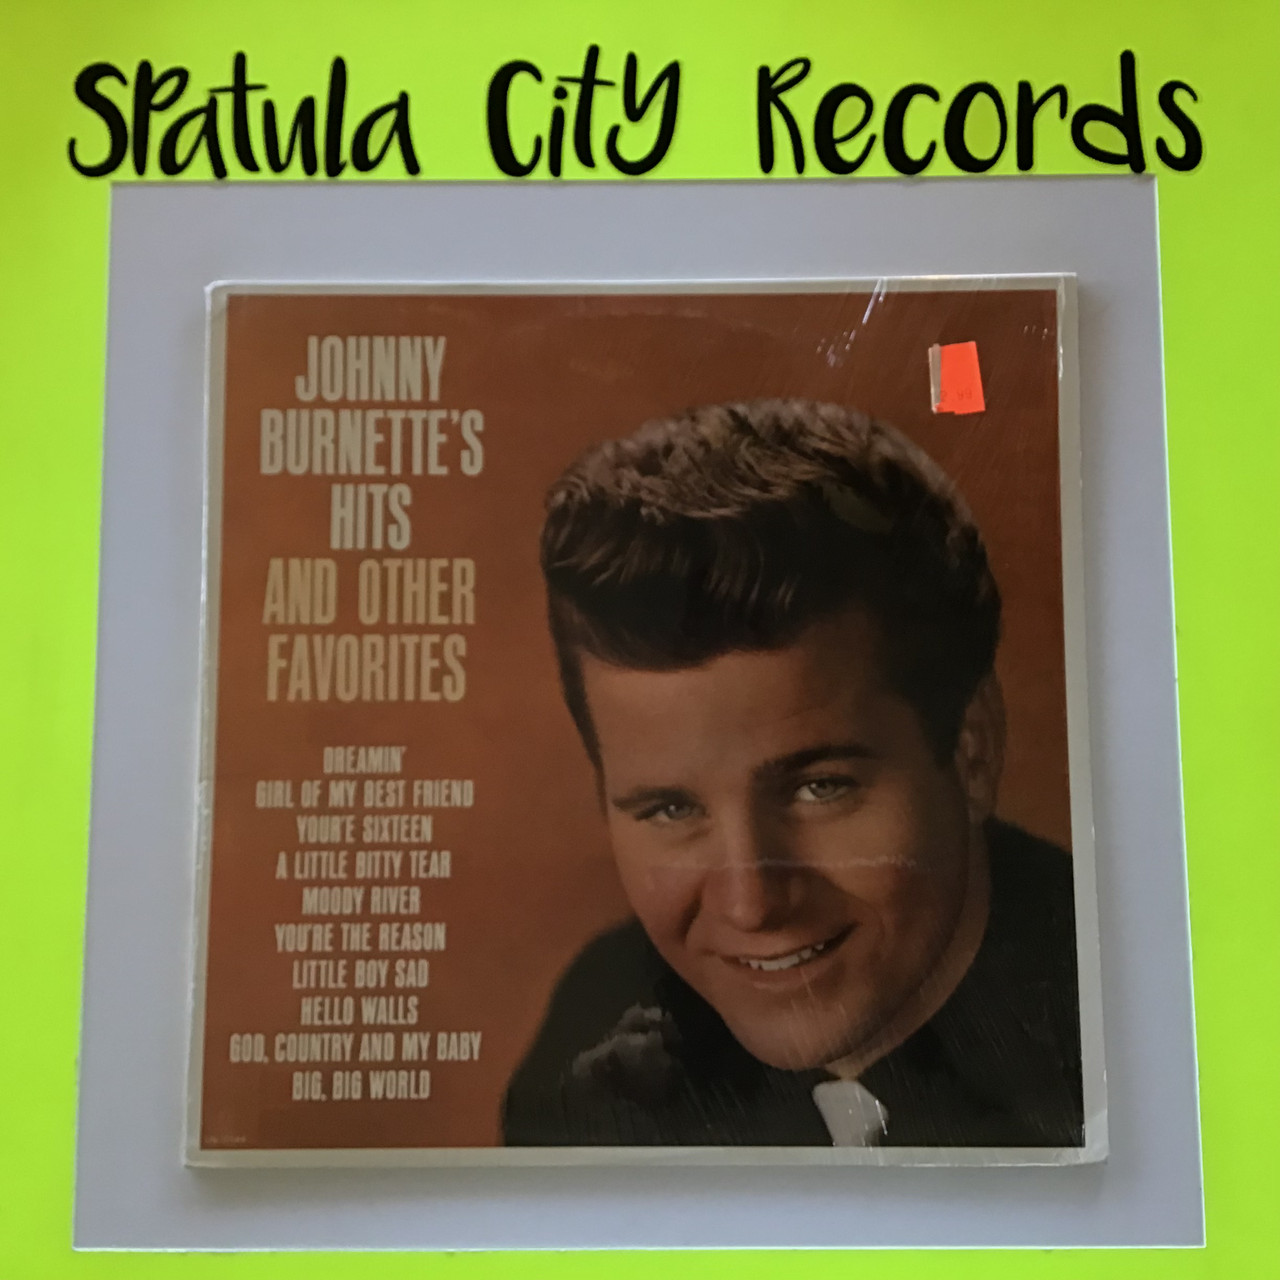 Johnny Burnette - Hits and Other Favorites - vinyl record LP